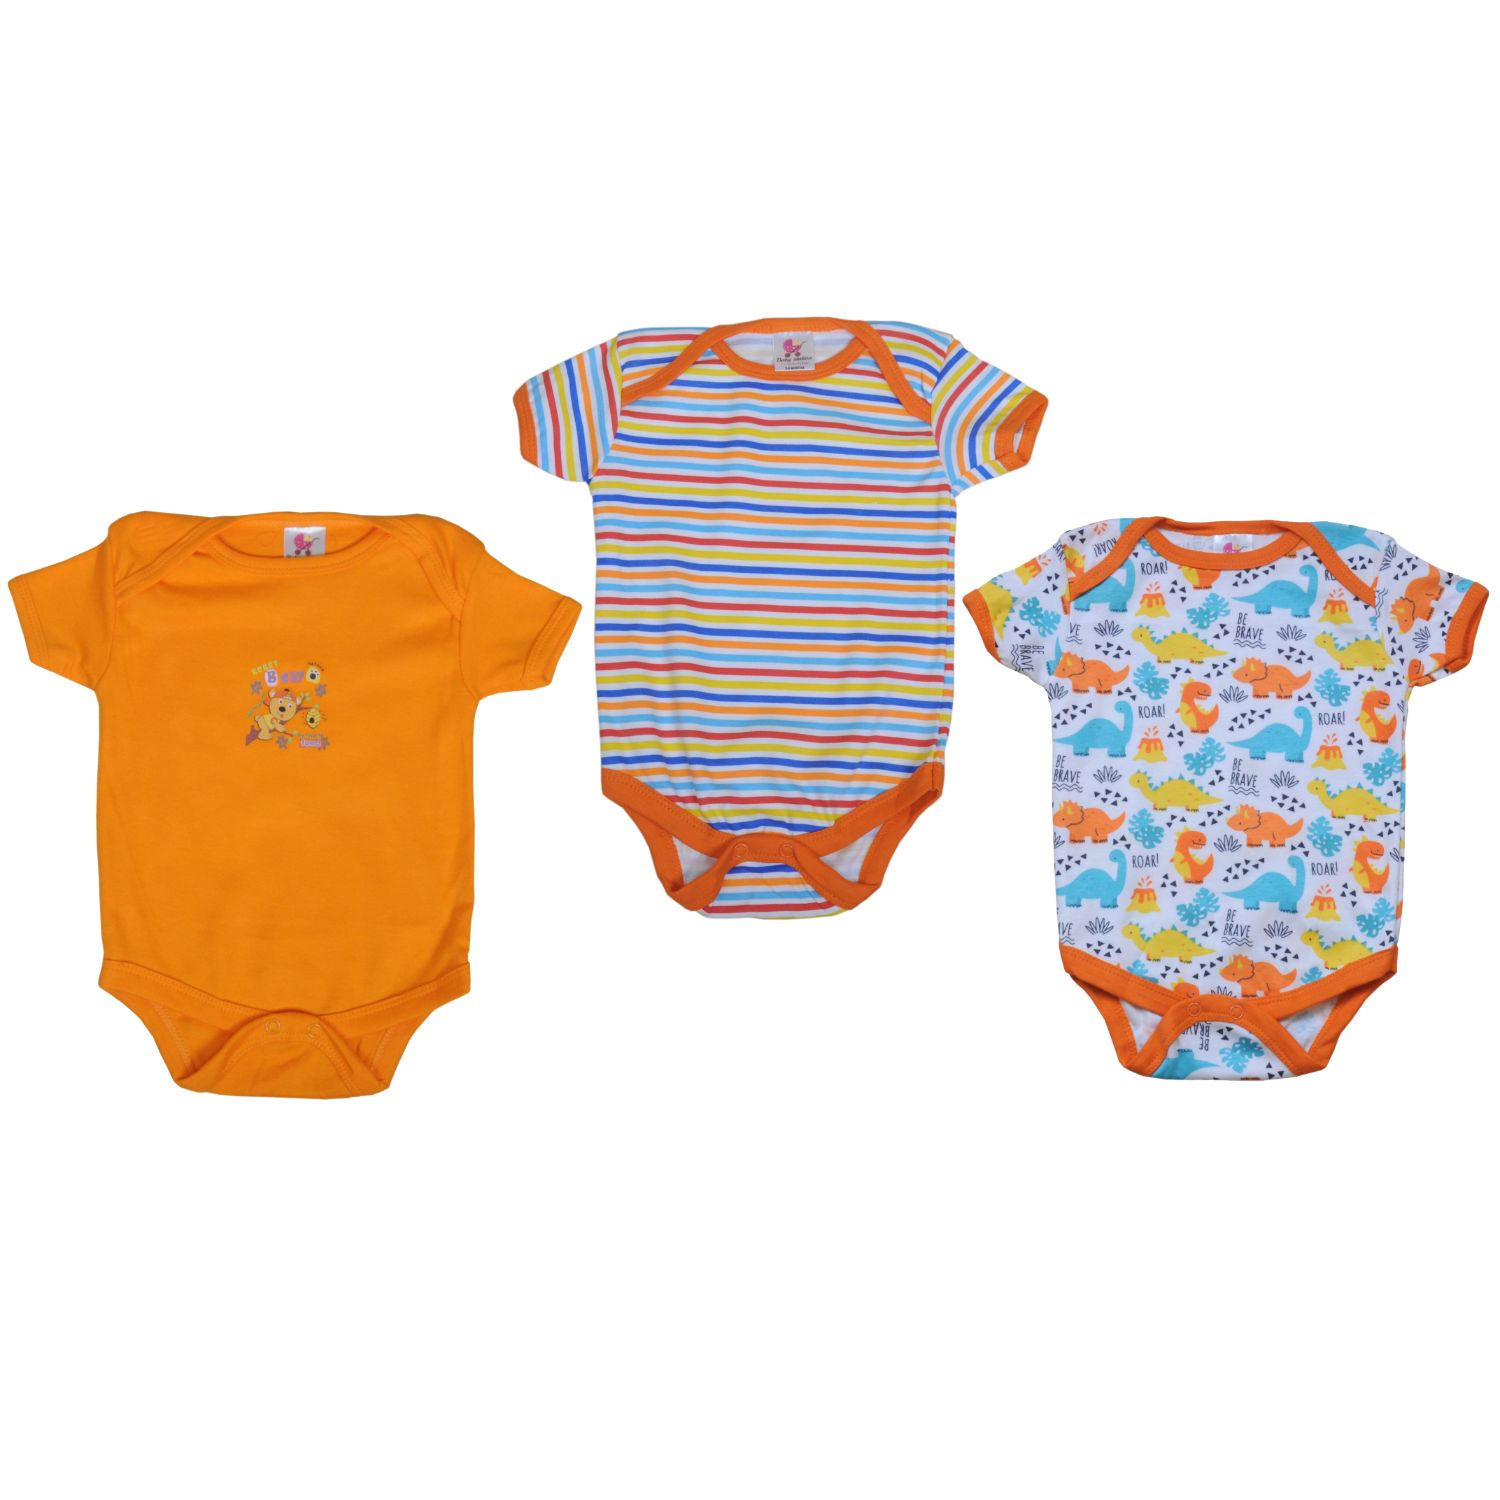 Clothing Unisex Kids Clothing Bodysuits Robot Baby Bodysuit Long Or Short Sleeve Newborn Outfit Robot Costume Baby Boy Coming Home Outfit 